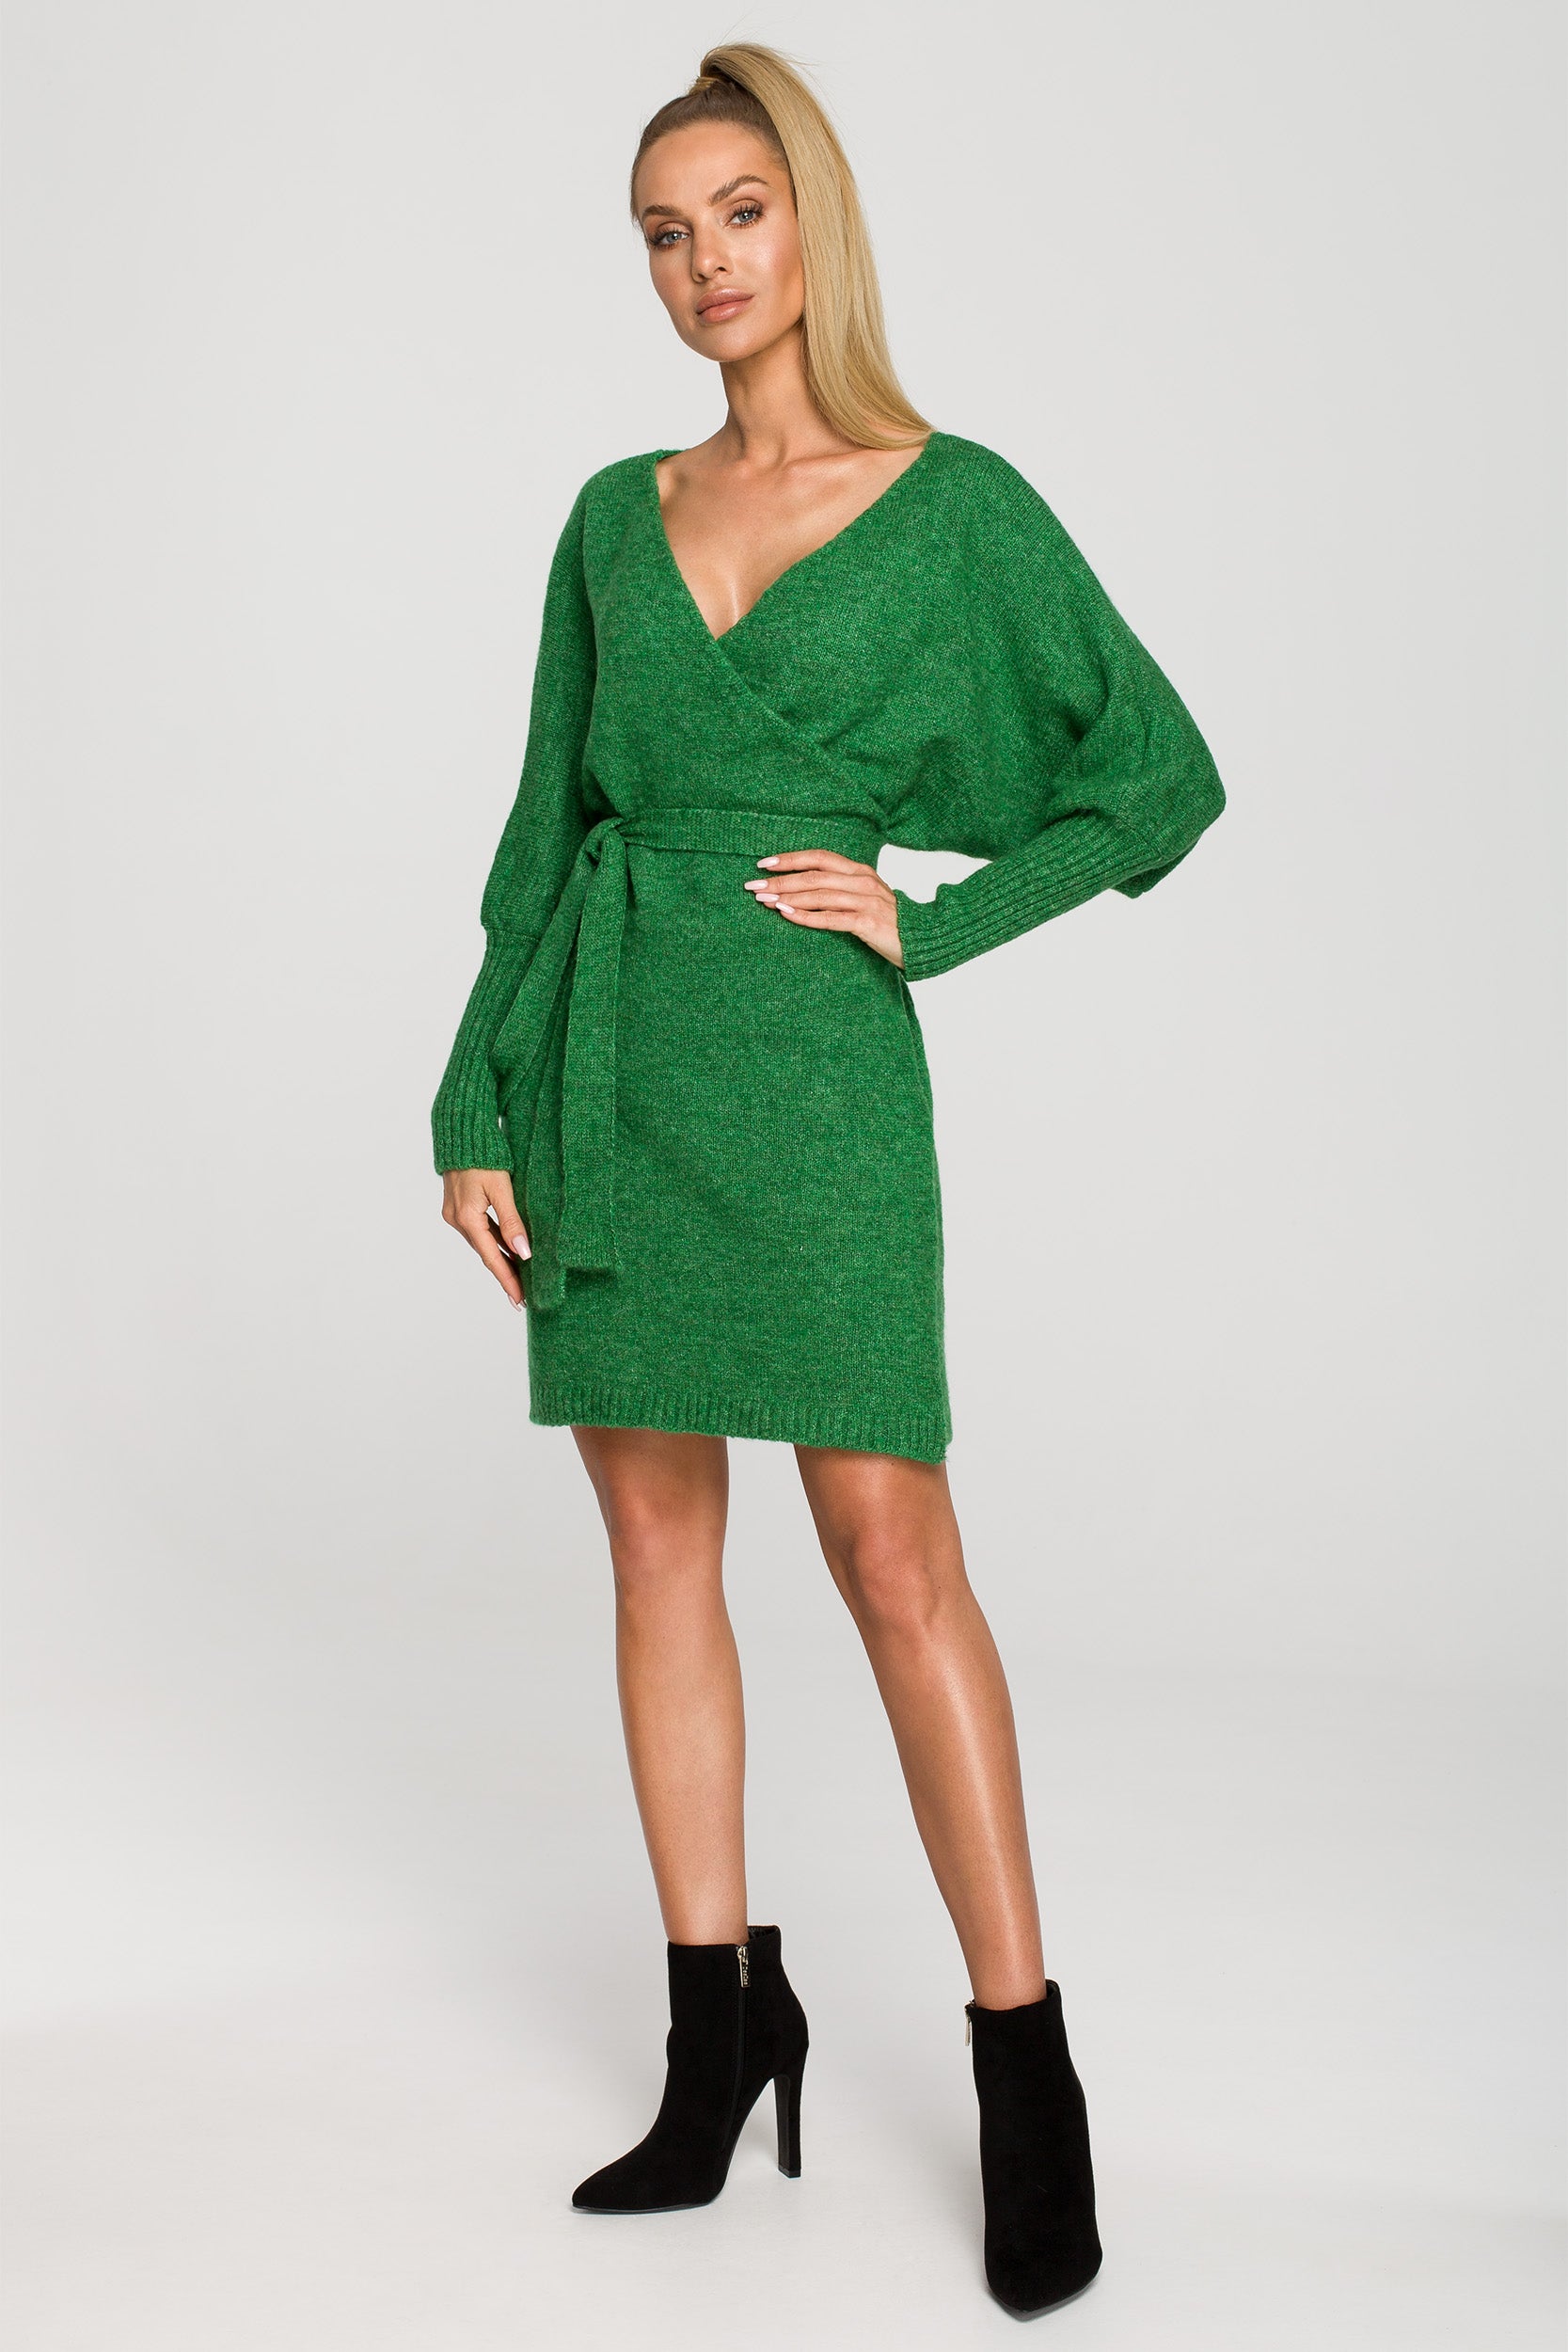 Wrap Mini Sweater Dress | Strictly In | Discover warmth and style in our chunky knit, relaxed-fit wrap sweater dress. Featuring a tie detail and mini length this dress is your go-to for winter chic.